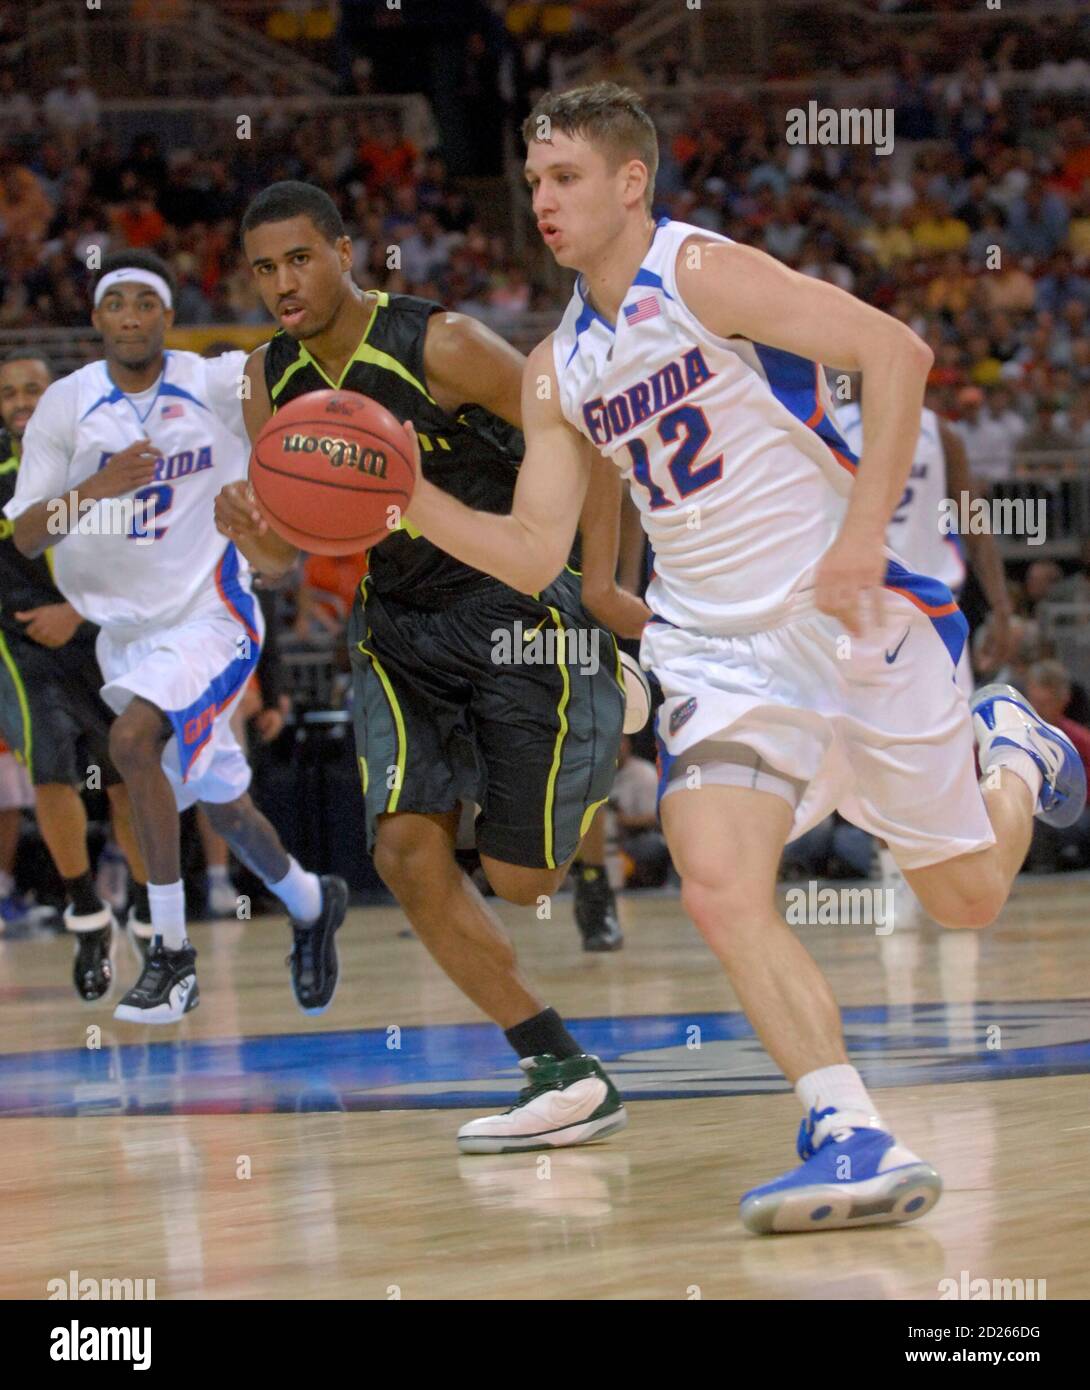 University of Florida Gators' Lee Humphrey (R) dribbles the ball past  University of Oregon Ducks' Bryce Taylor (C) as Gators player Corey Brewer  watches on in their NCAA men's Midwest Regional final